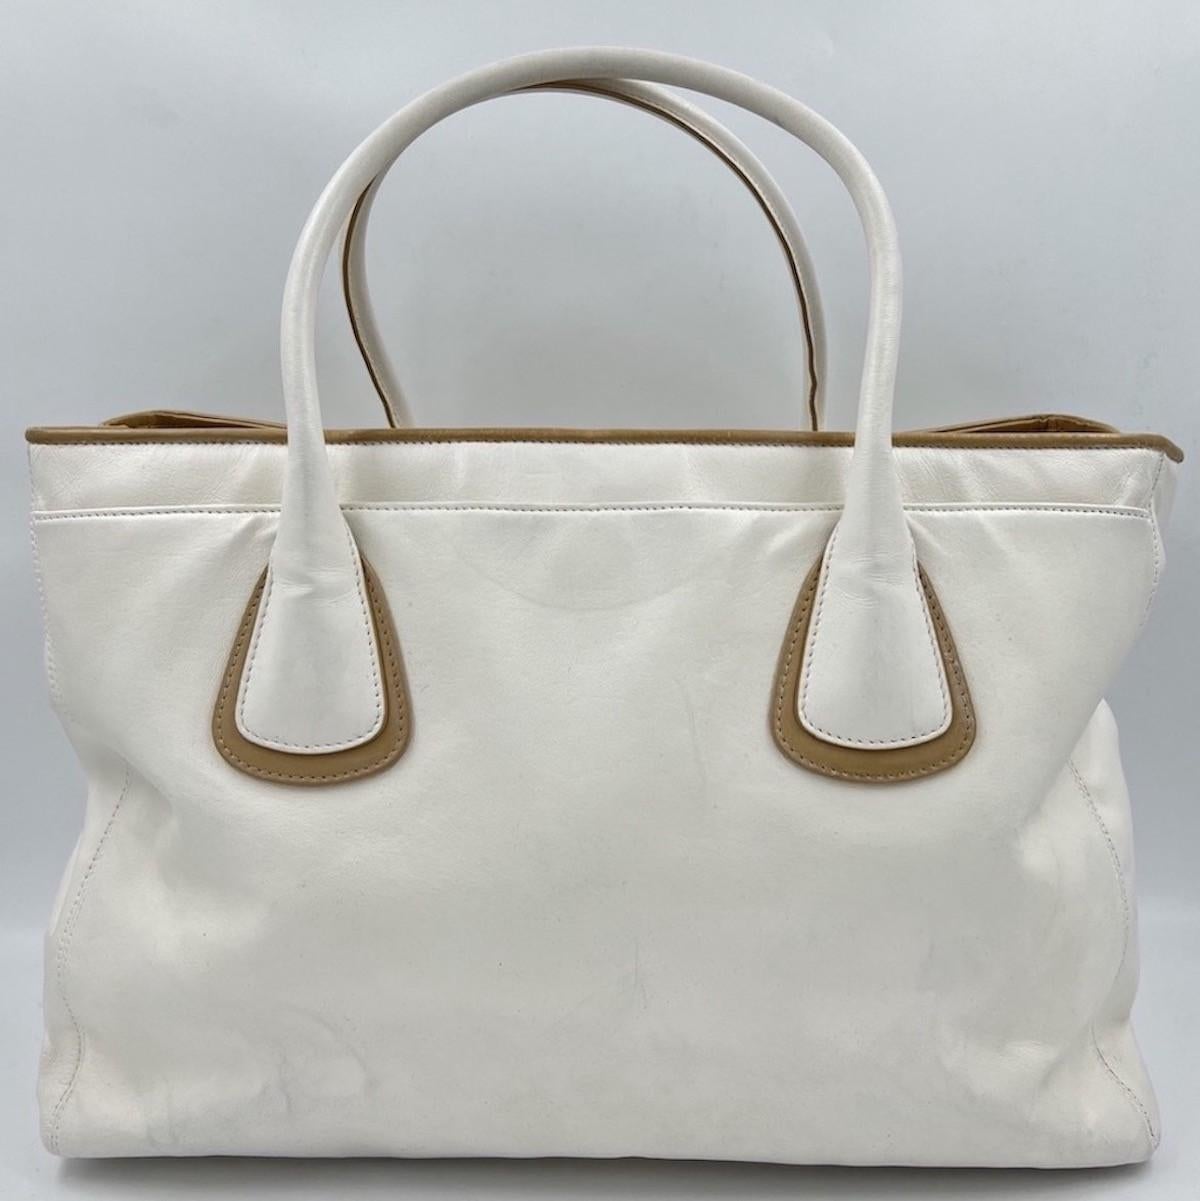 CHANEL beige tote bag in leather. The jewelry is in palladium silver metal. It has a removable pocket inside. Possibility to store a computer. 
It was re-dyed in the same color.
In very good condition.
Made in Italy.
Dimensions: 29 x 40 x 13cm
No